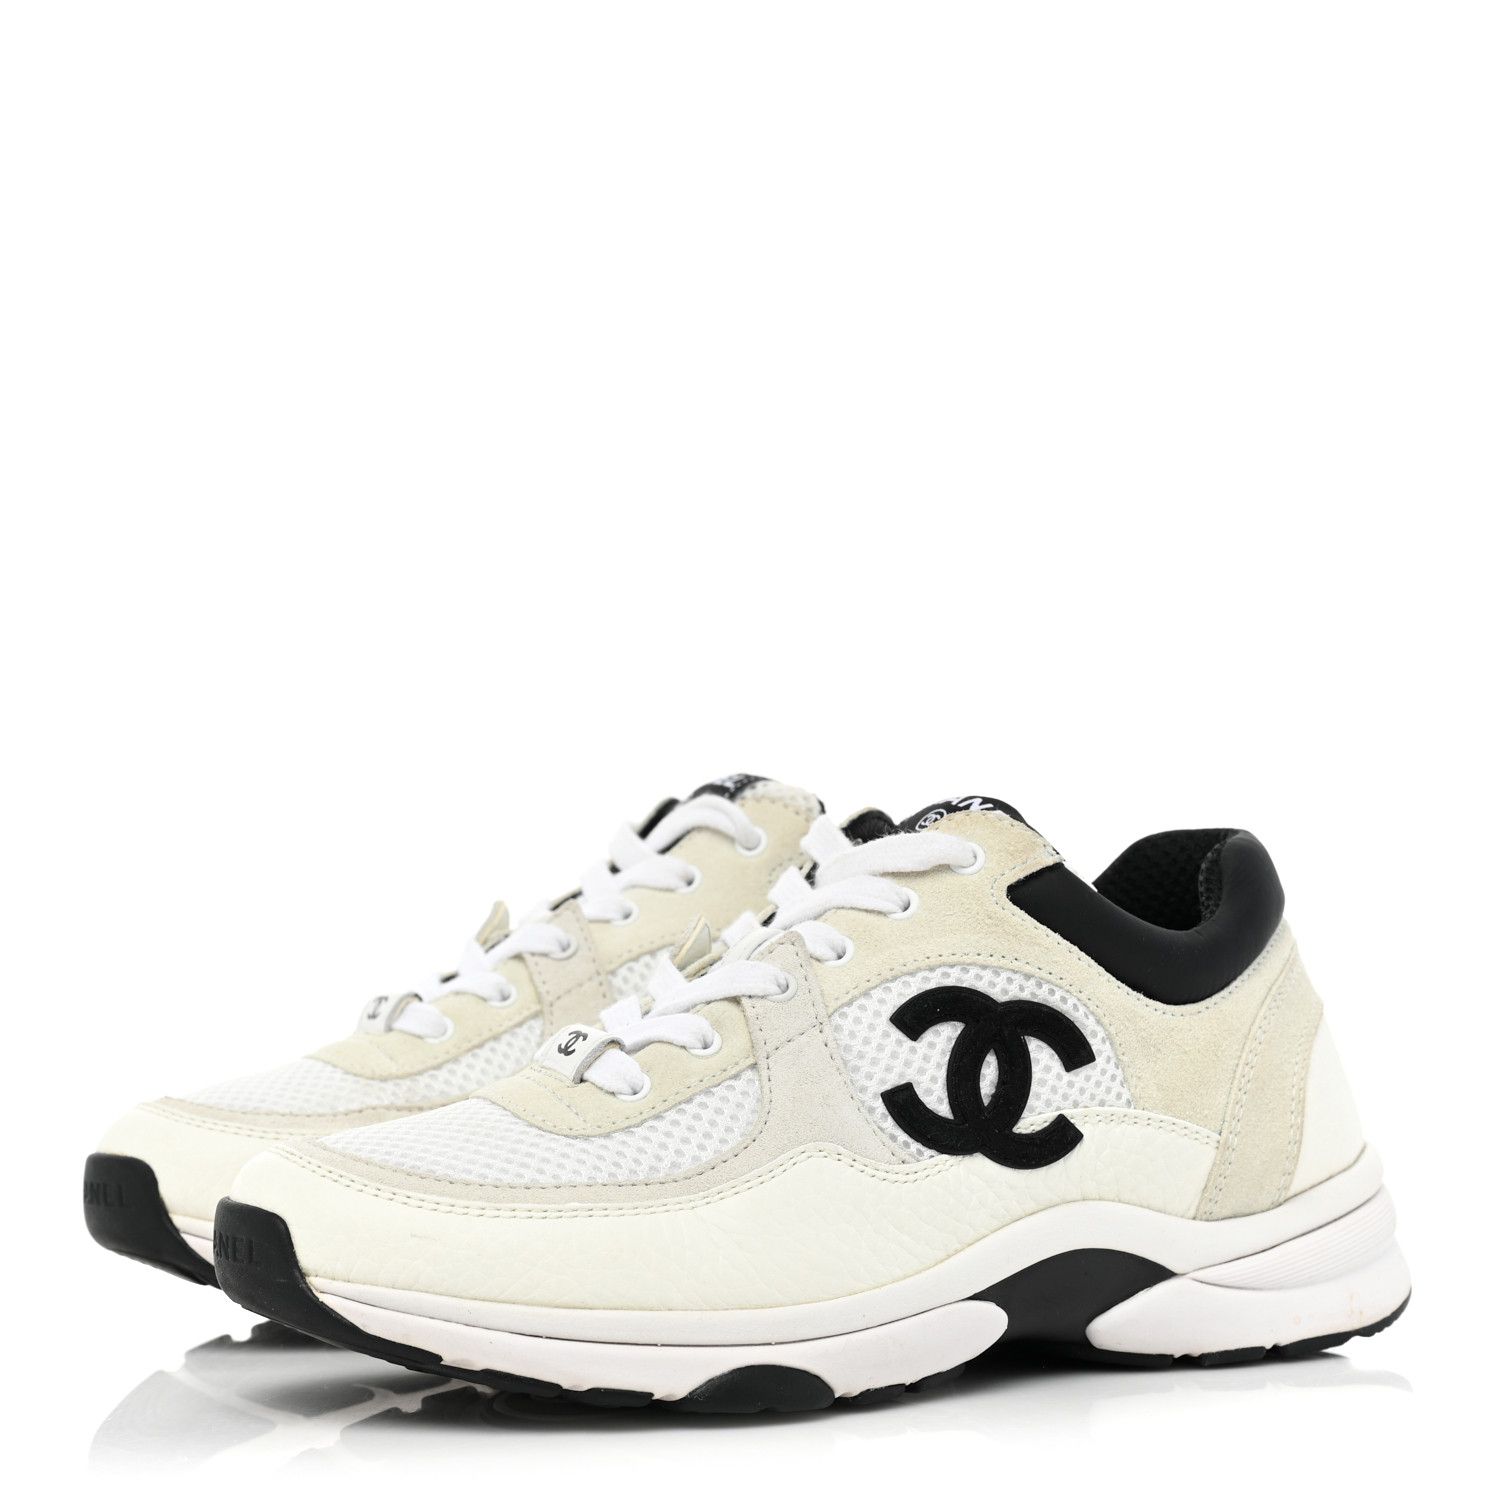 Chanel Chanel Suede Grained Calfskin CC Sneakers 38 White Black